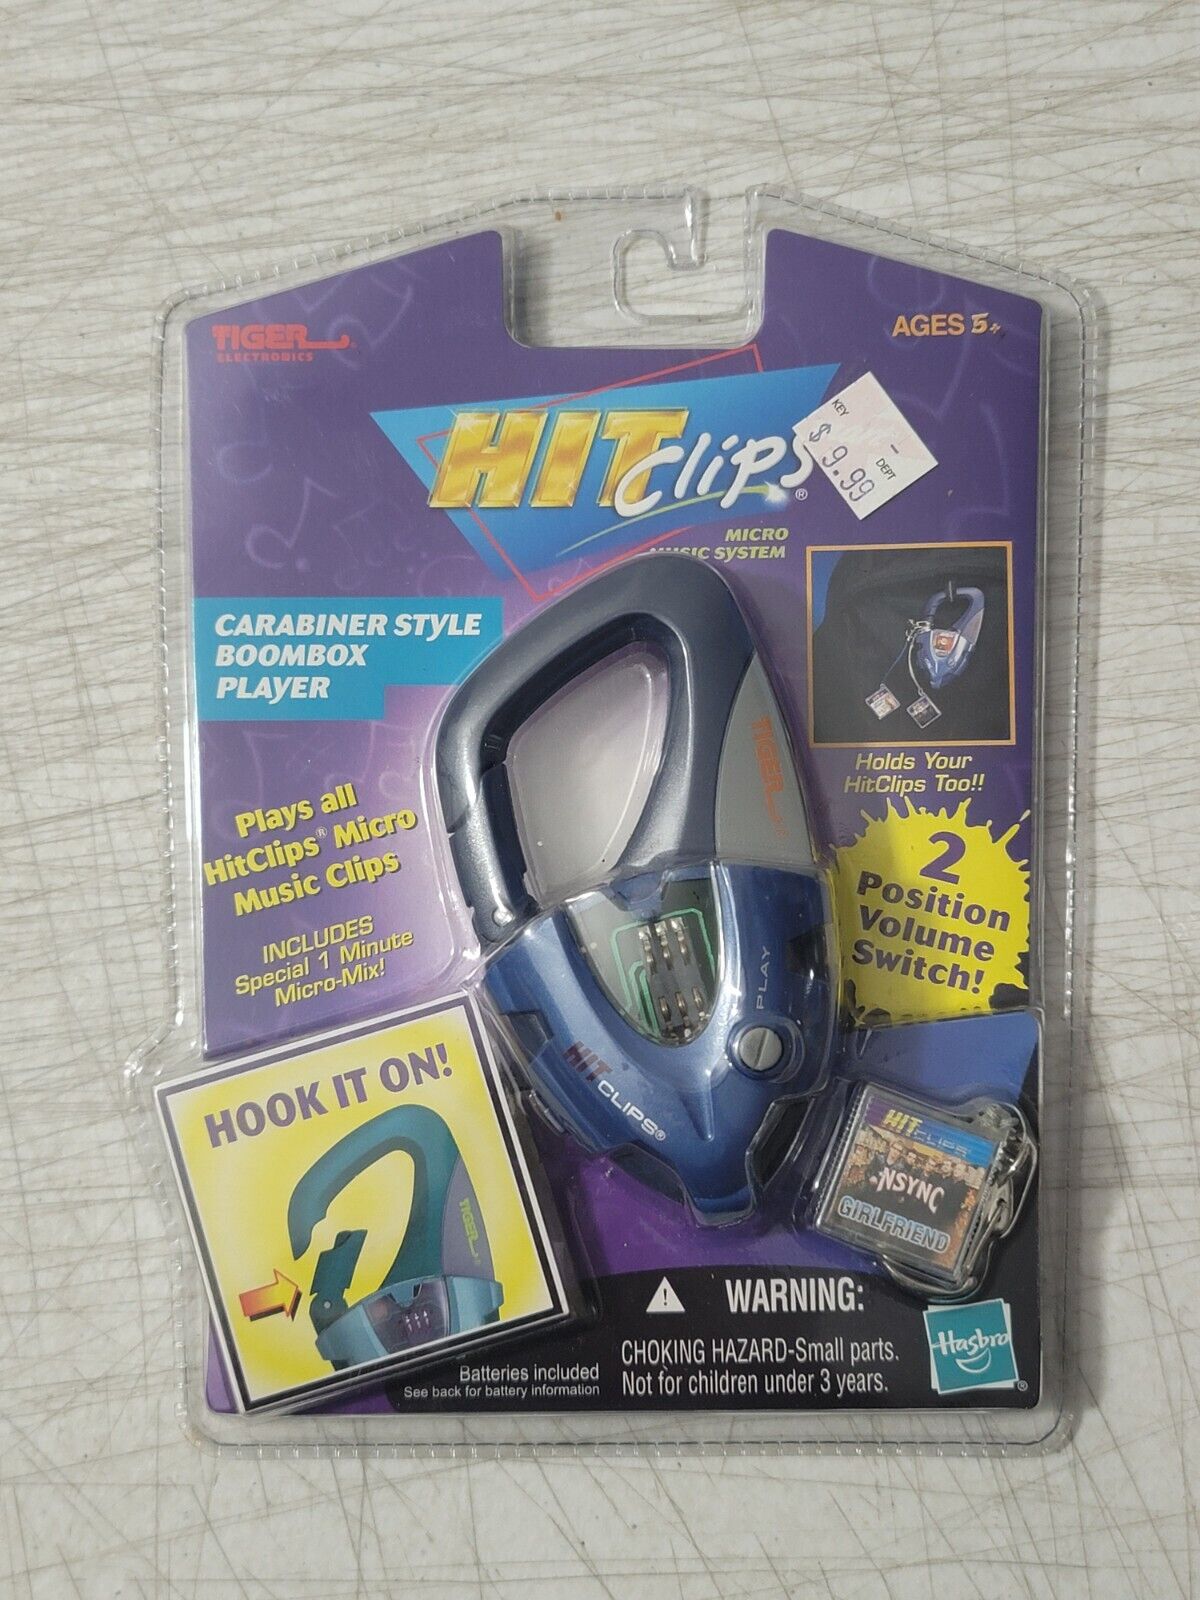 Tiger Electronics Hit Clips Nsync "girlfriend" Carabiner Style Boombox Player